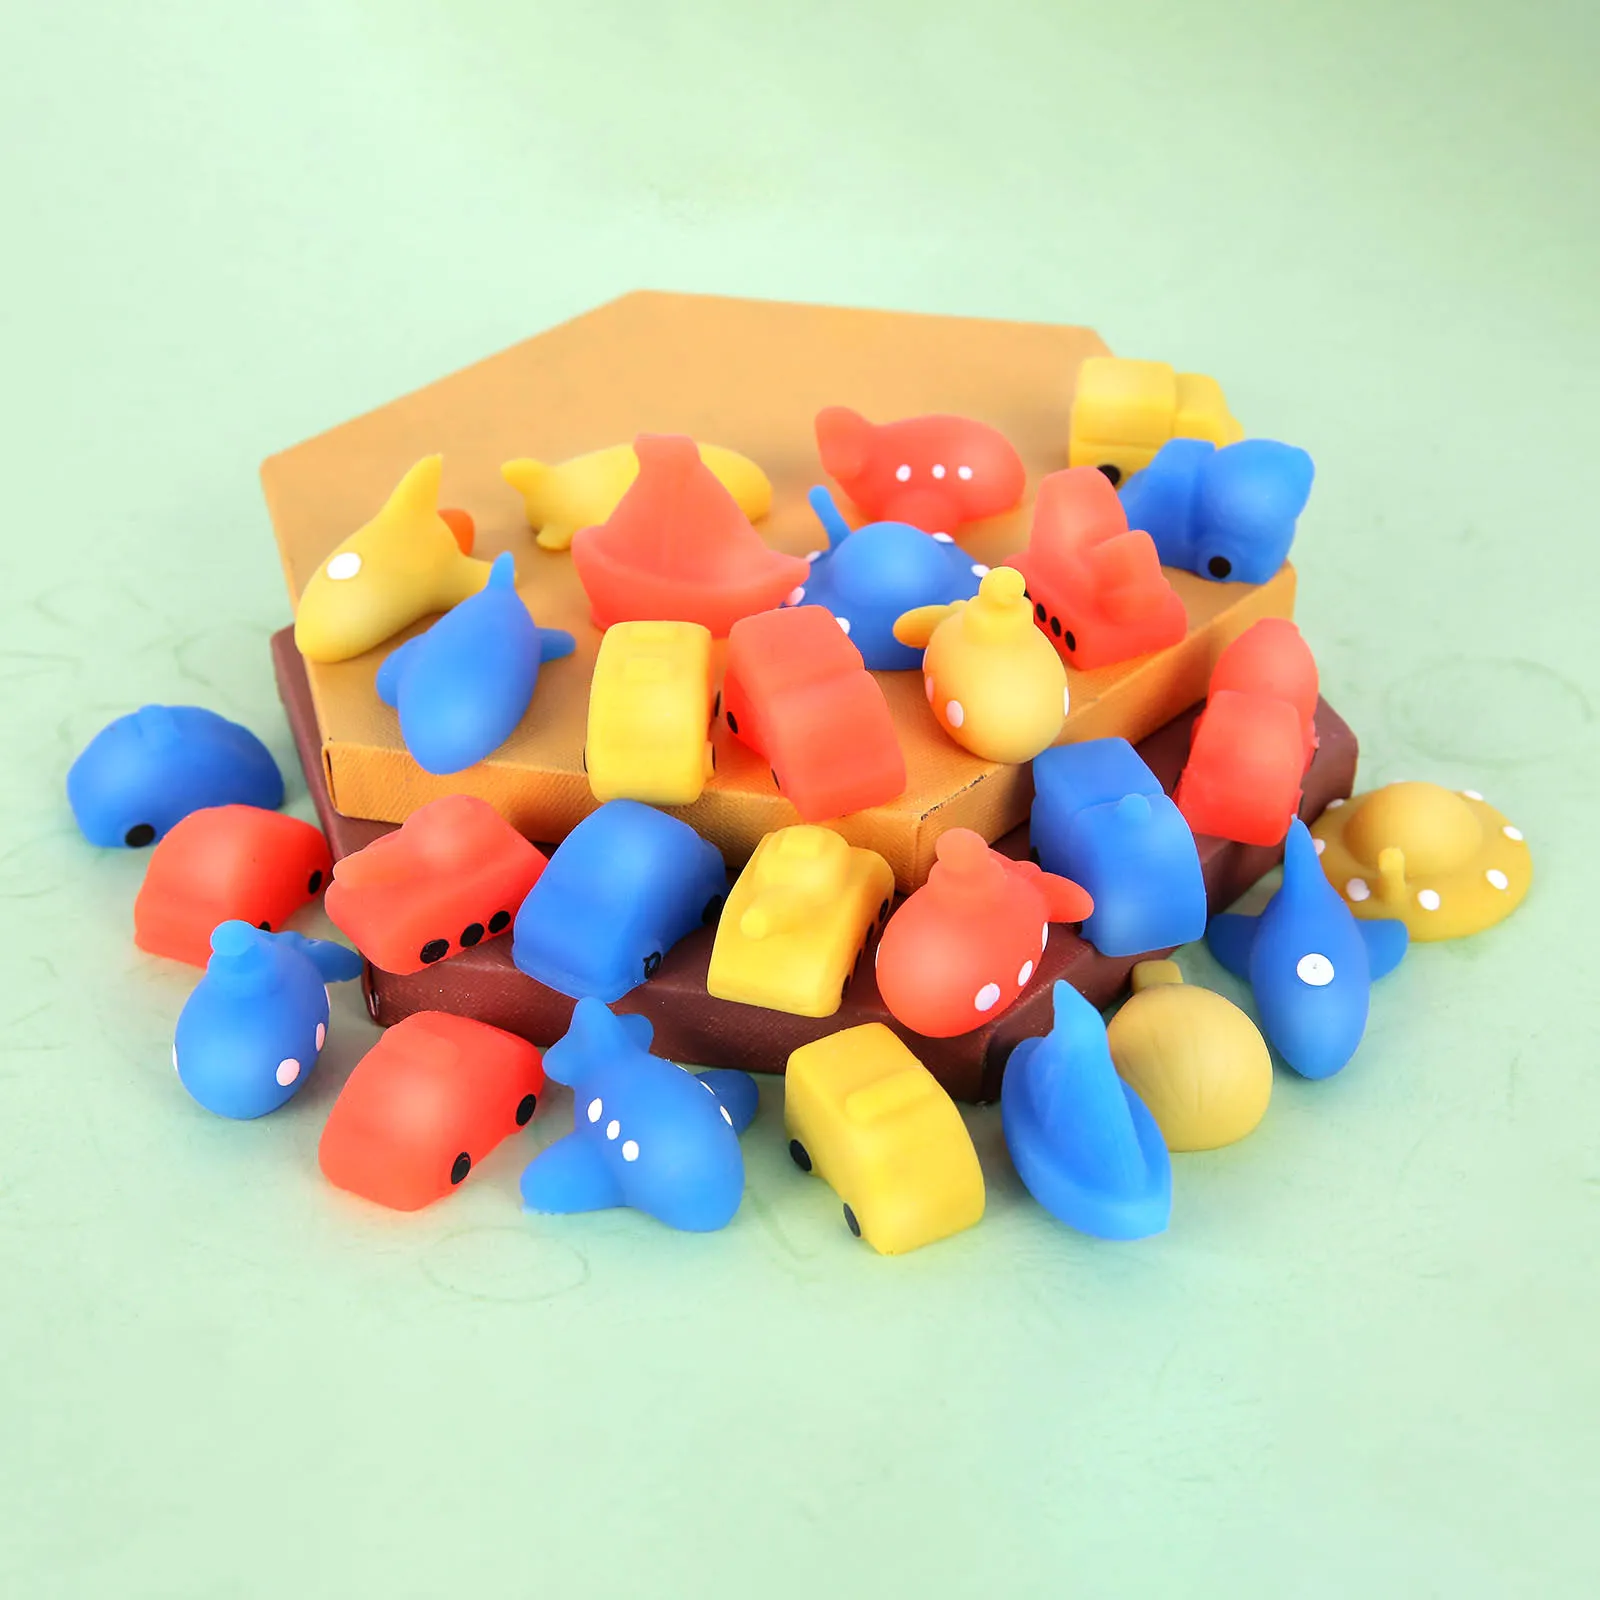 20 Pcs/Lot Kawaii Transporter Eco-Friendly Tpr Soft Rubber Kneading Baby Fun Games Leisure Toys Gifts Kids Stress Relief Toys enlarge